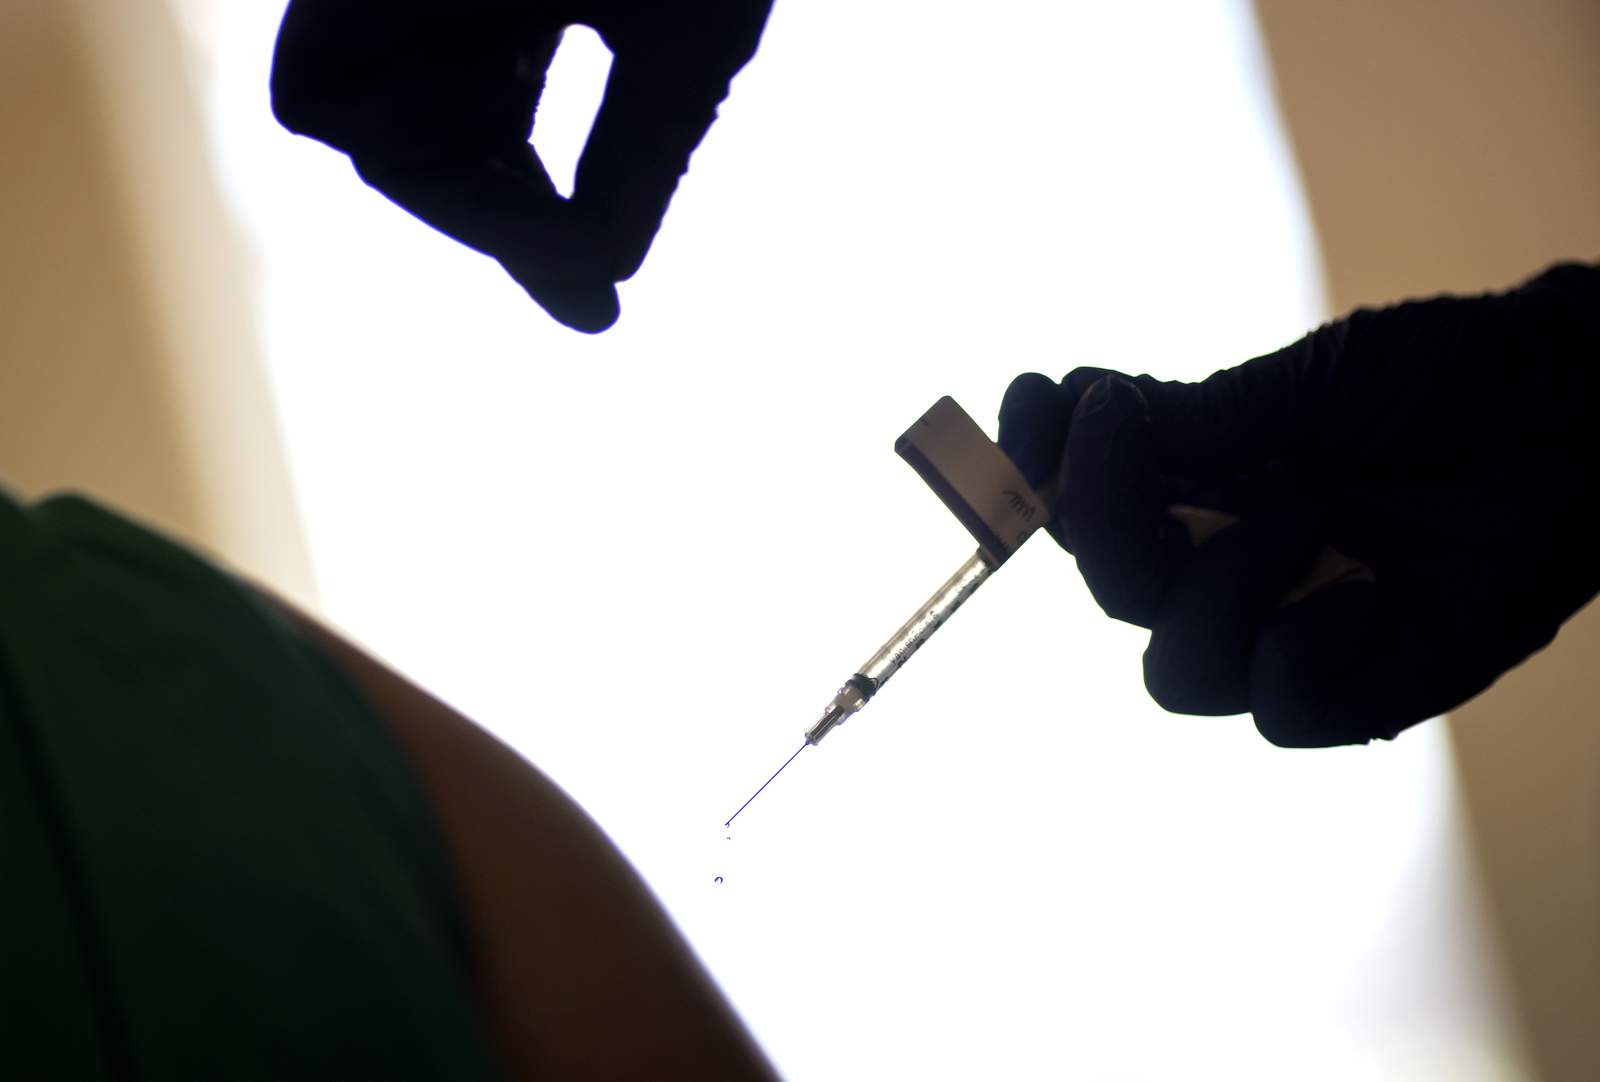 ‘Deception on a national scale’: Governors complain over pace of COVID-19 vaccine shipments